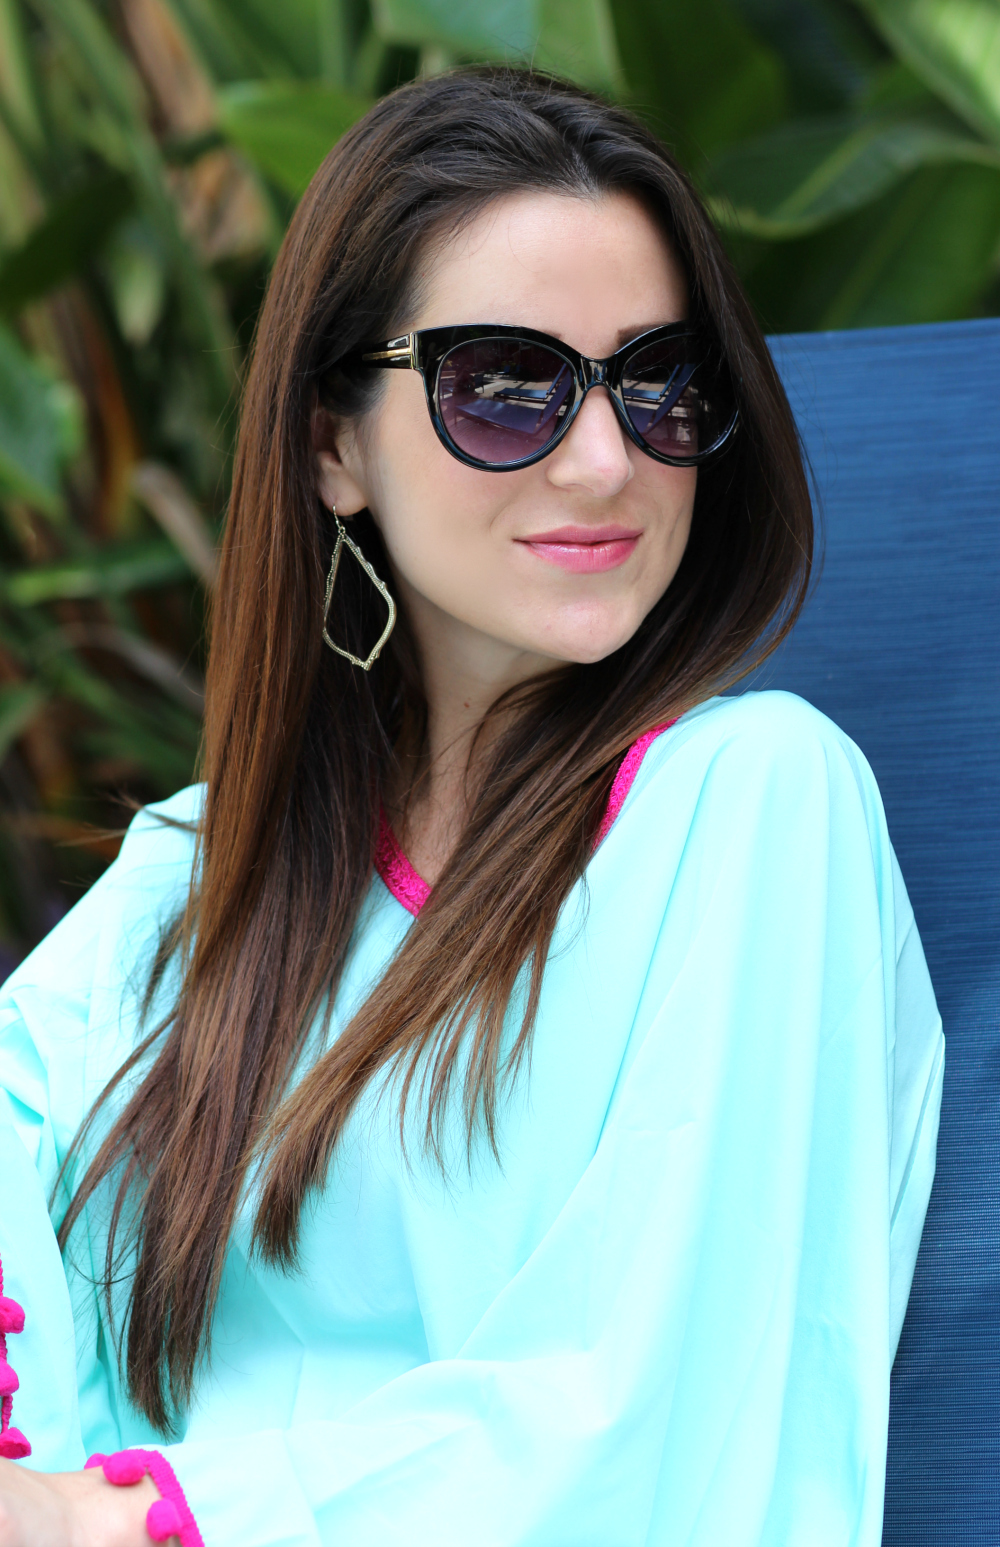 Kendra Scott gold Sophee earrings and cat eye sunglasses styled by affordable fashion blogger Stephanie Ziajka on Diary of a Debutante